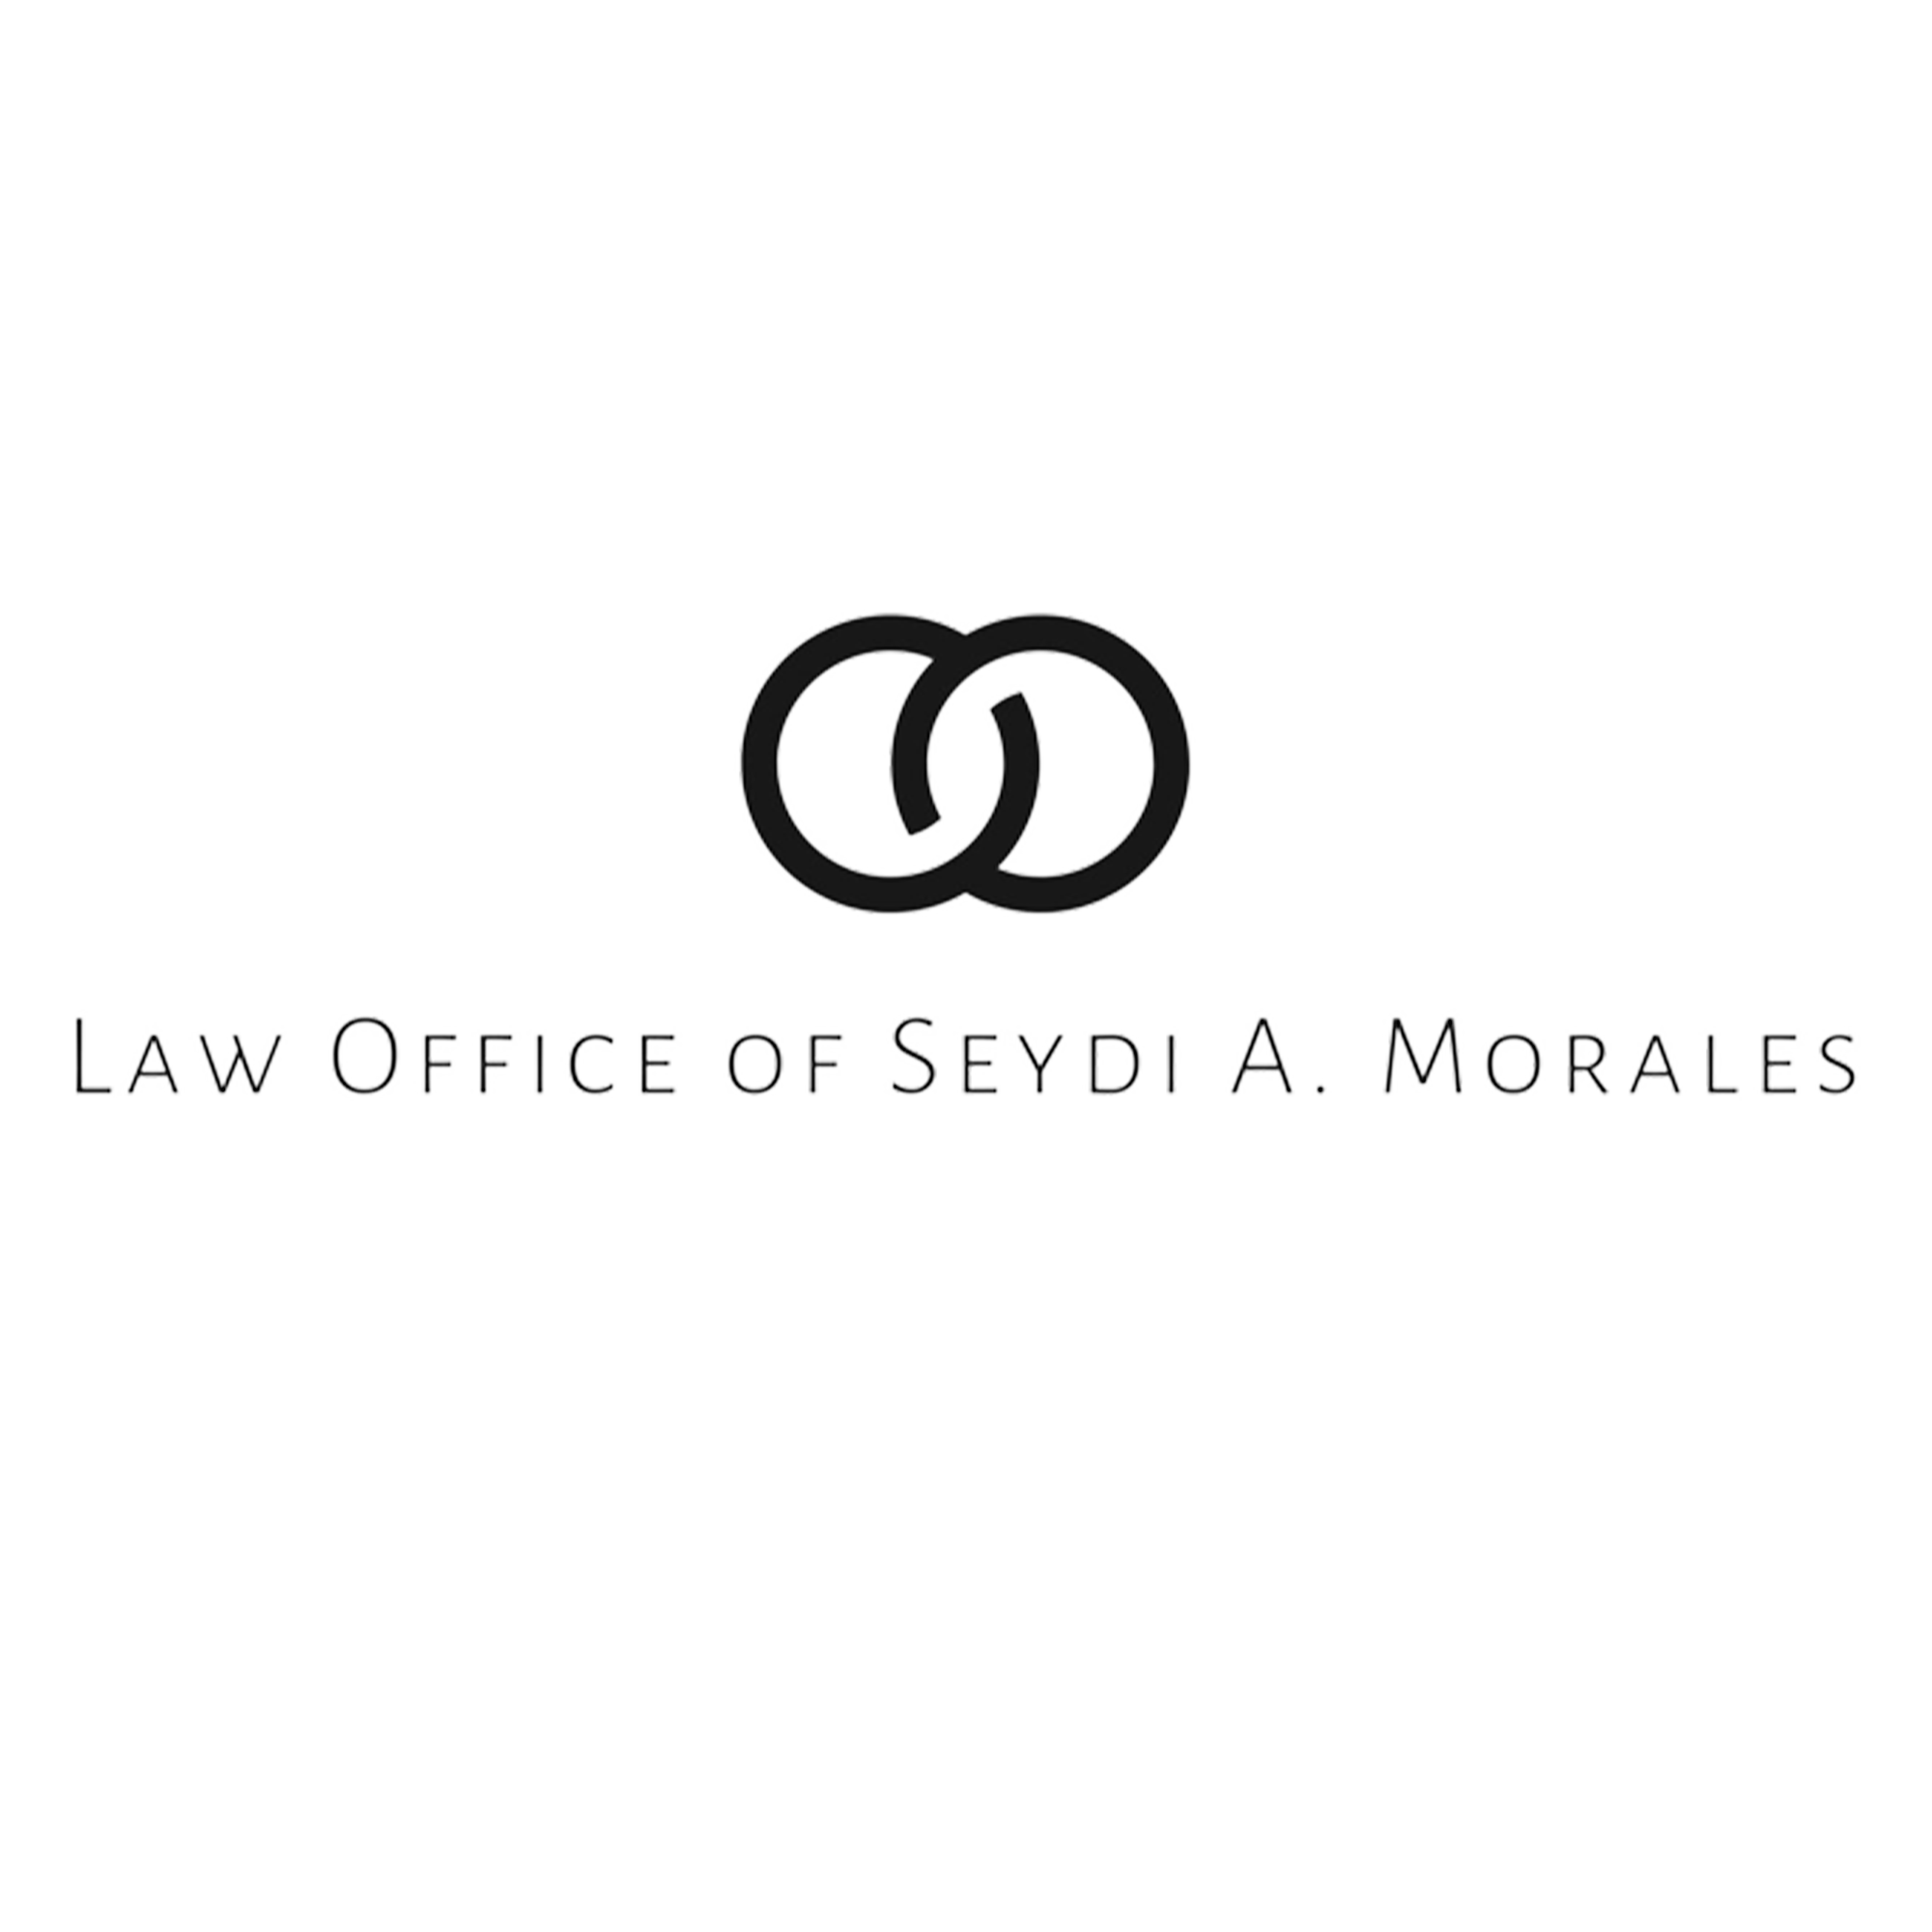 Worker’s Comp Lawyers- Your Representatives For Justice - Los Angeles Attorney